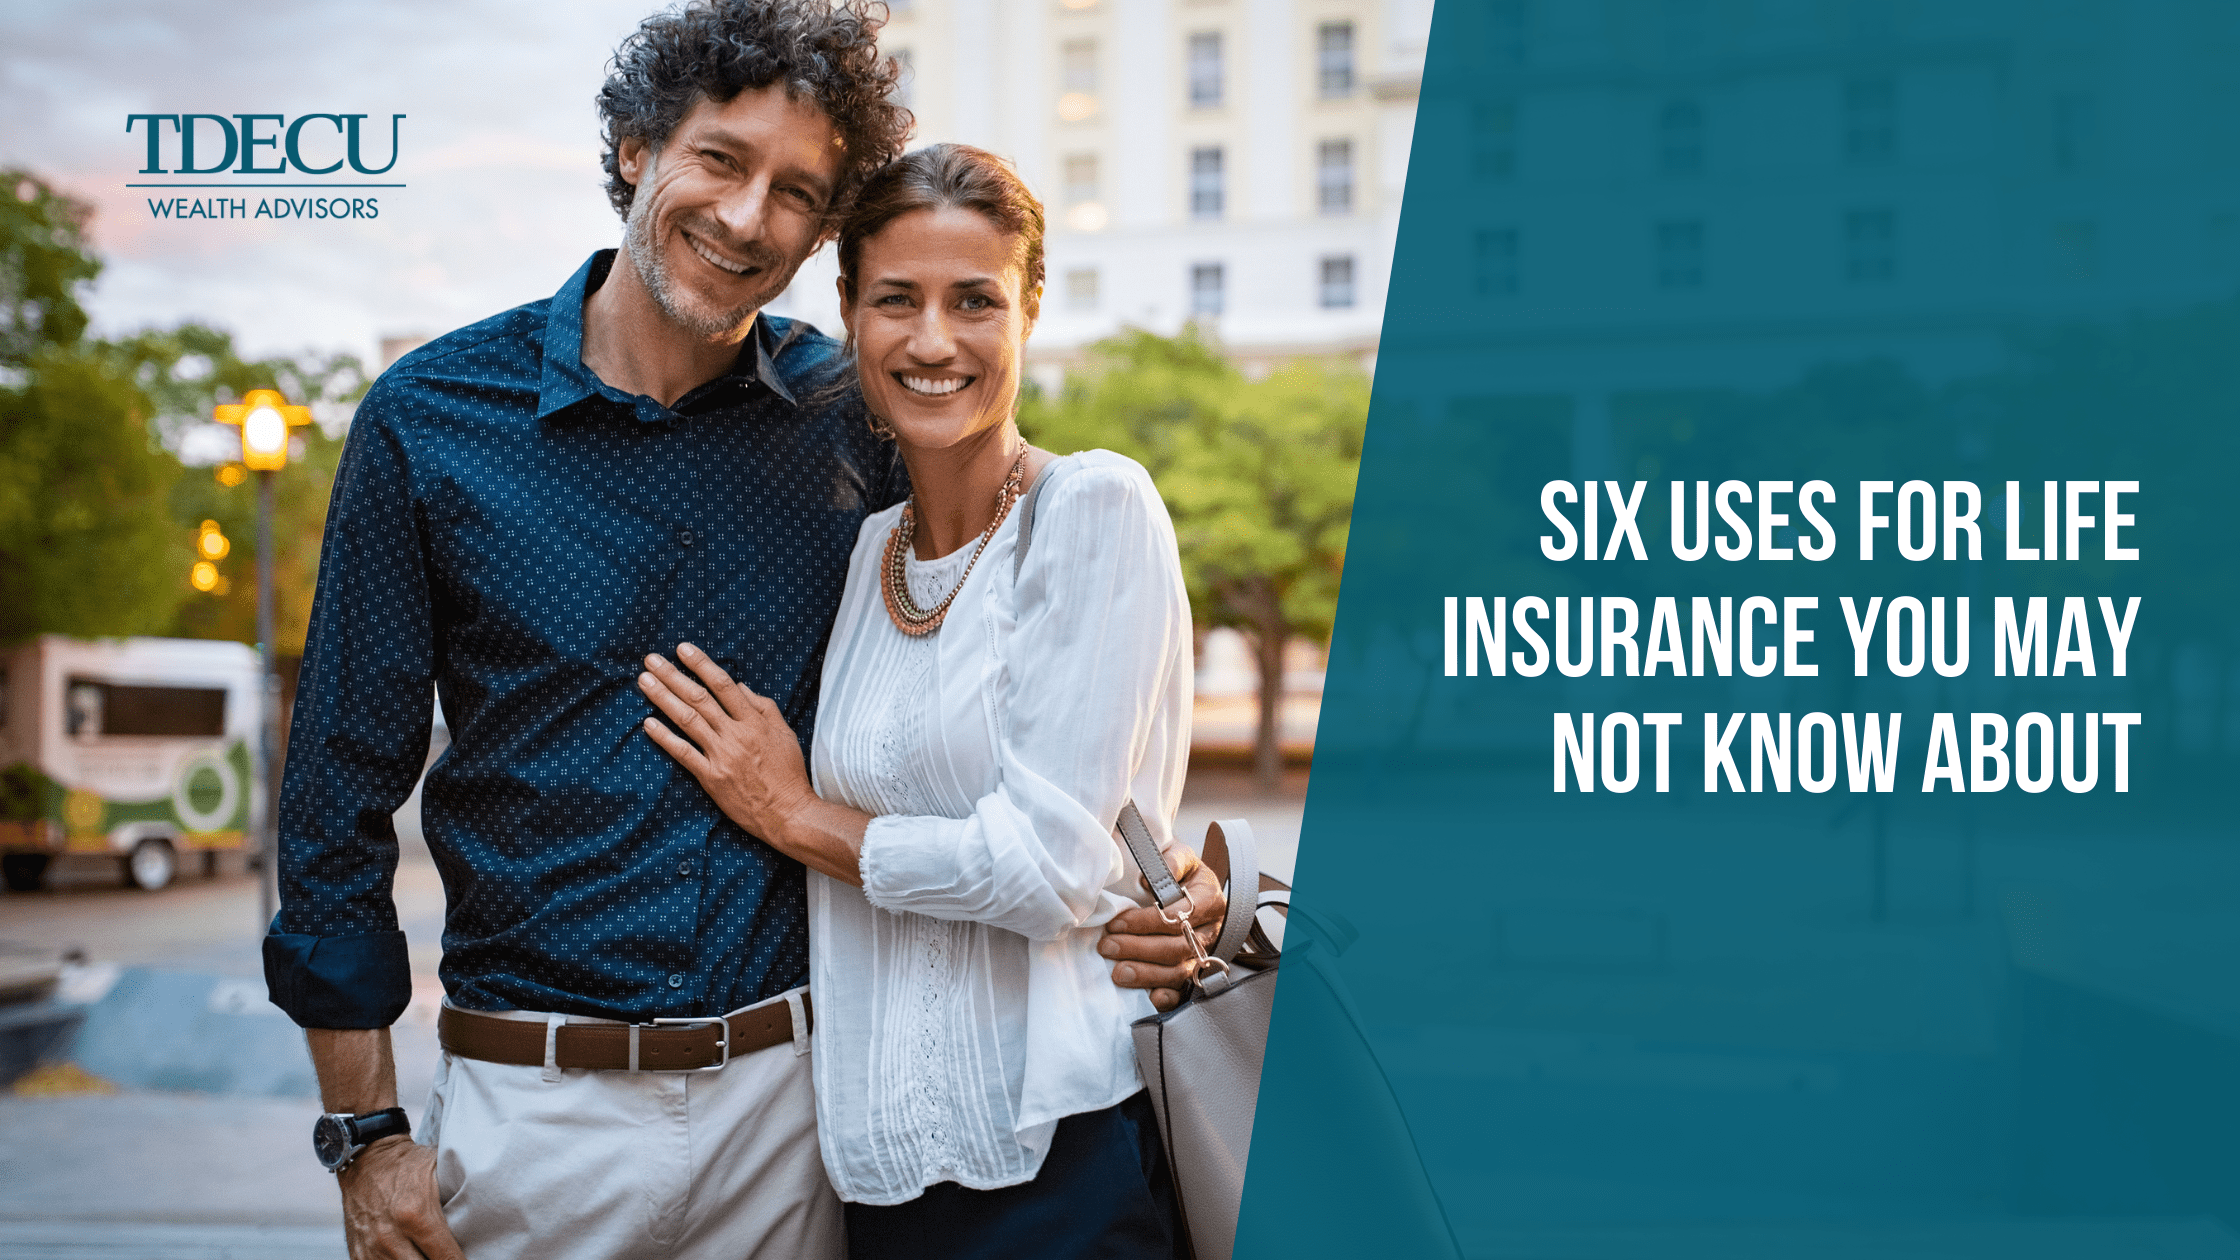 Six Uses for Life Insurance You May Not Know About